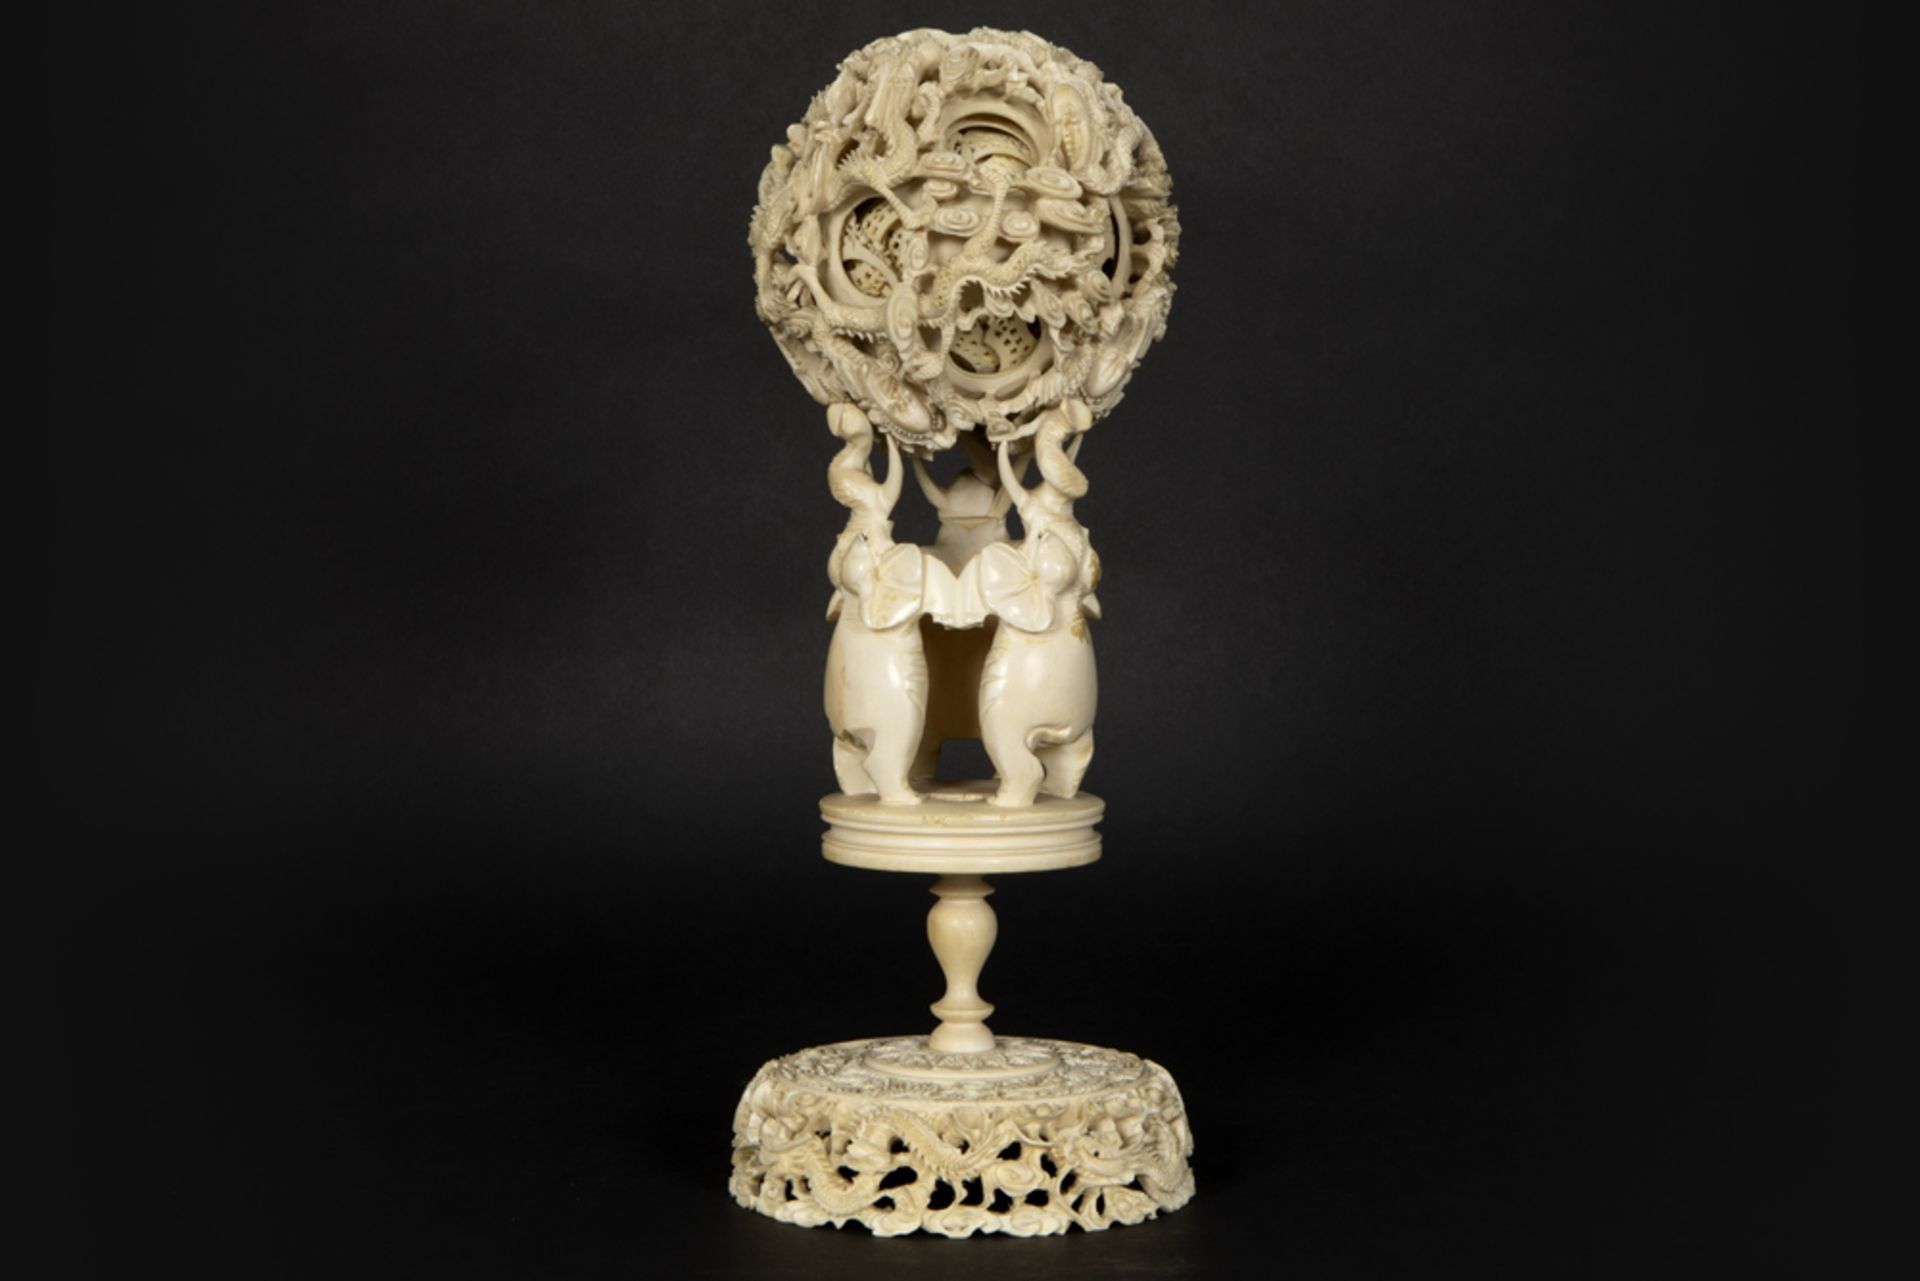 19th Cent. Chinese Qing period "Canton Ball" on a stand with elephants - typical fine Cantonese work